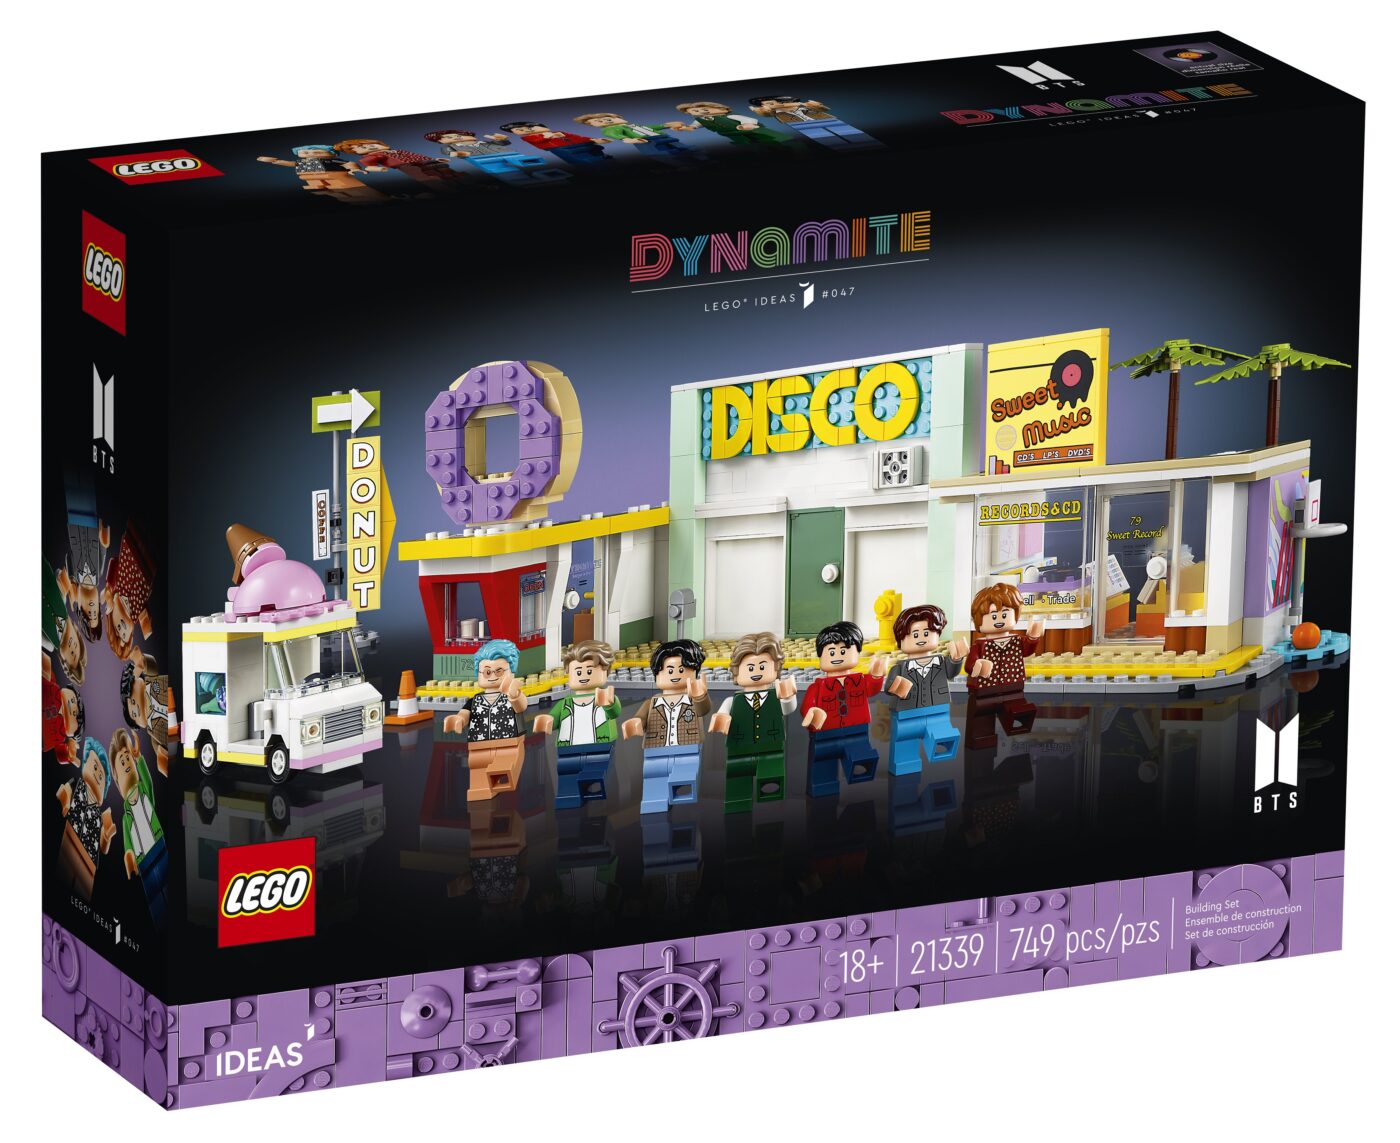 Check out the official LEGO 21339 BTS Dynamite set featuring the